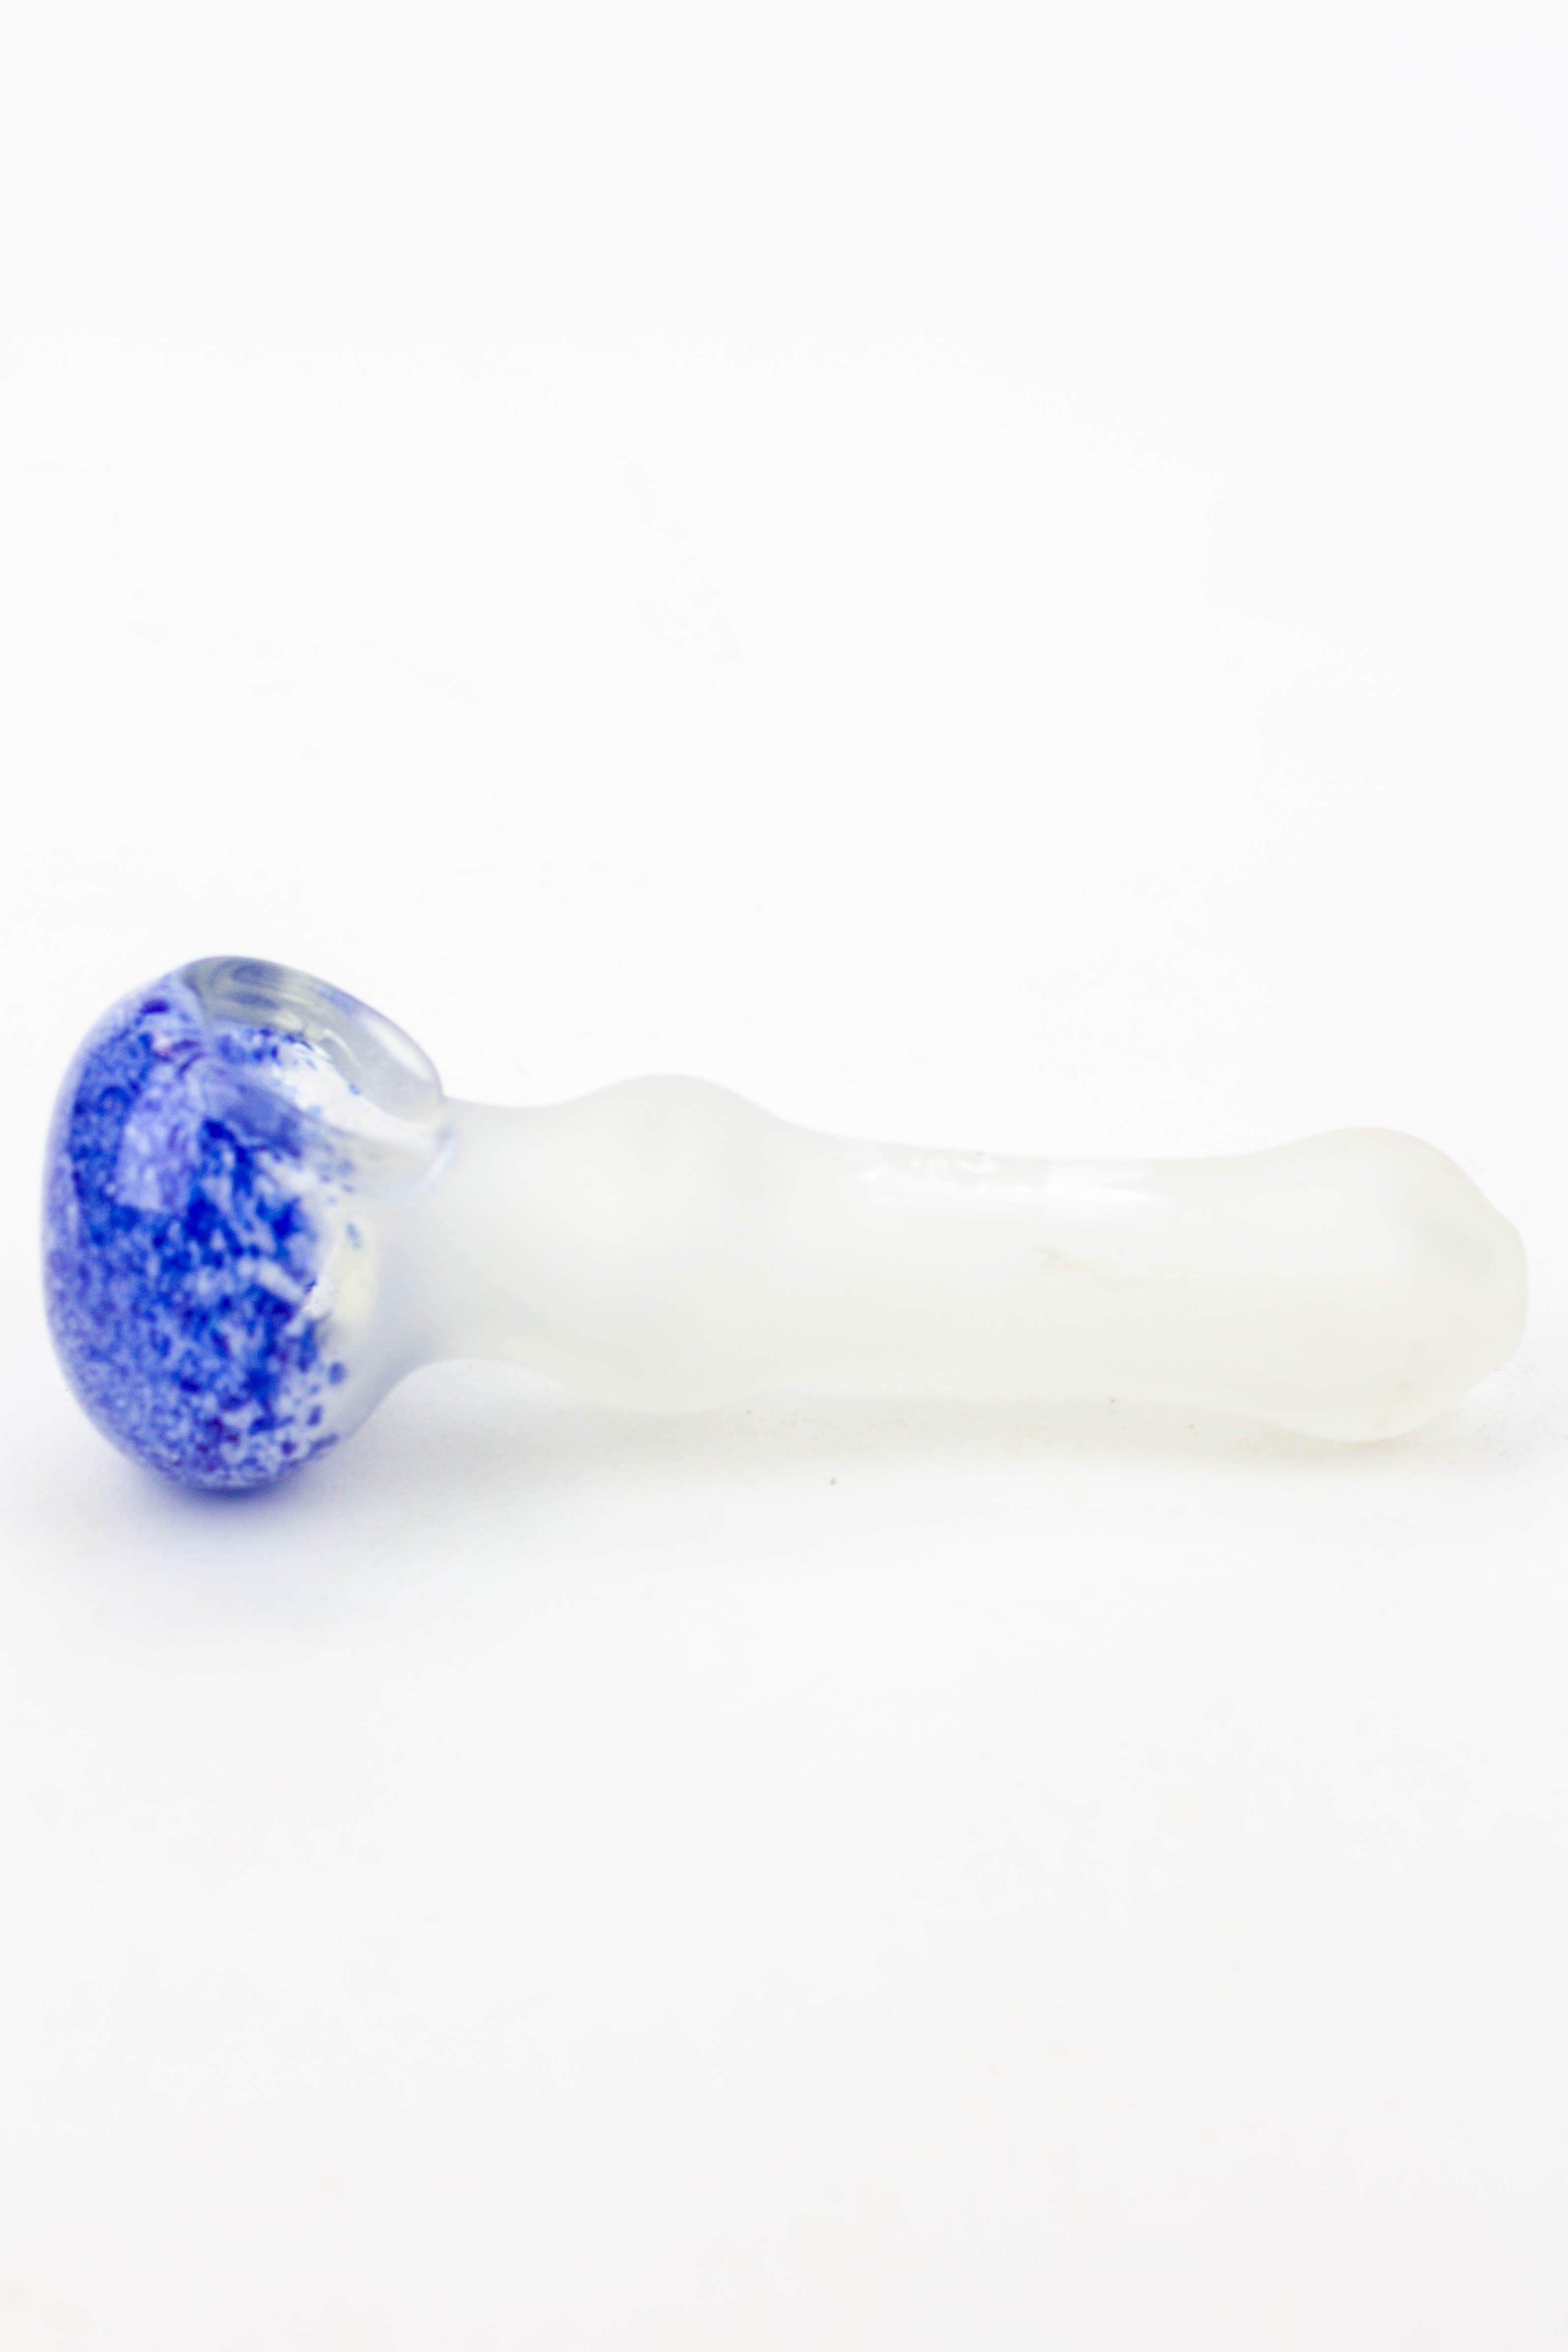 Frost soft glass hand pipe 4.5"_3